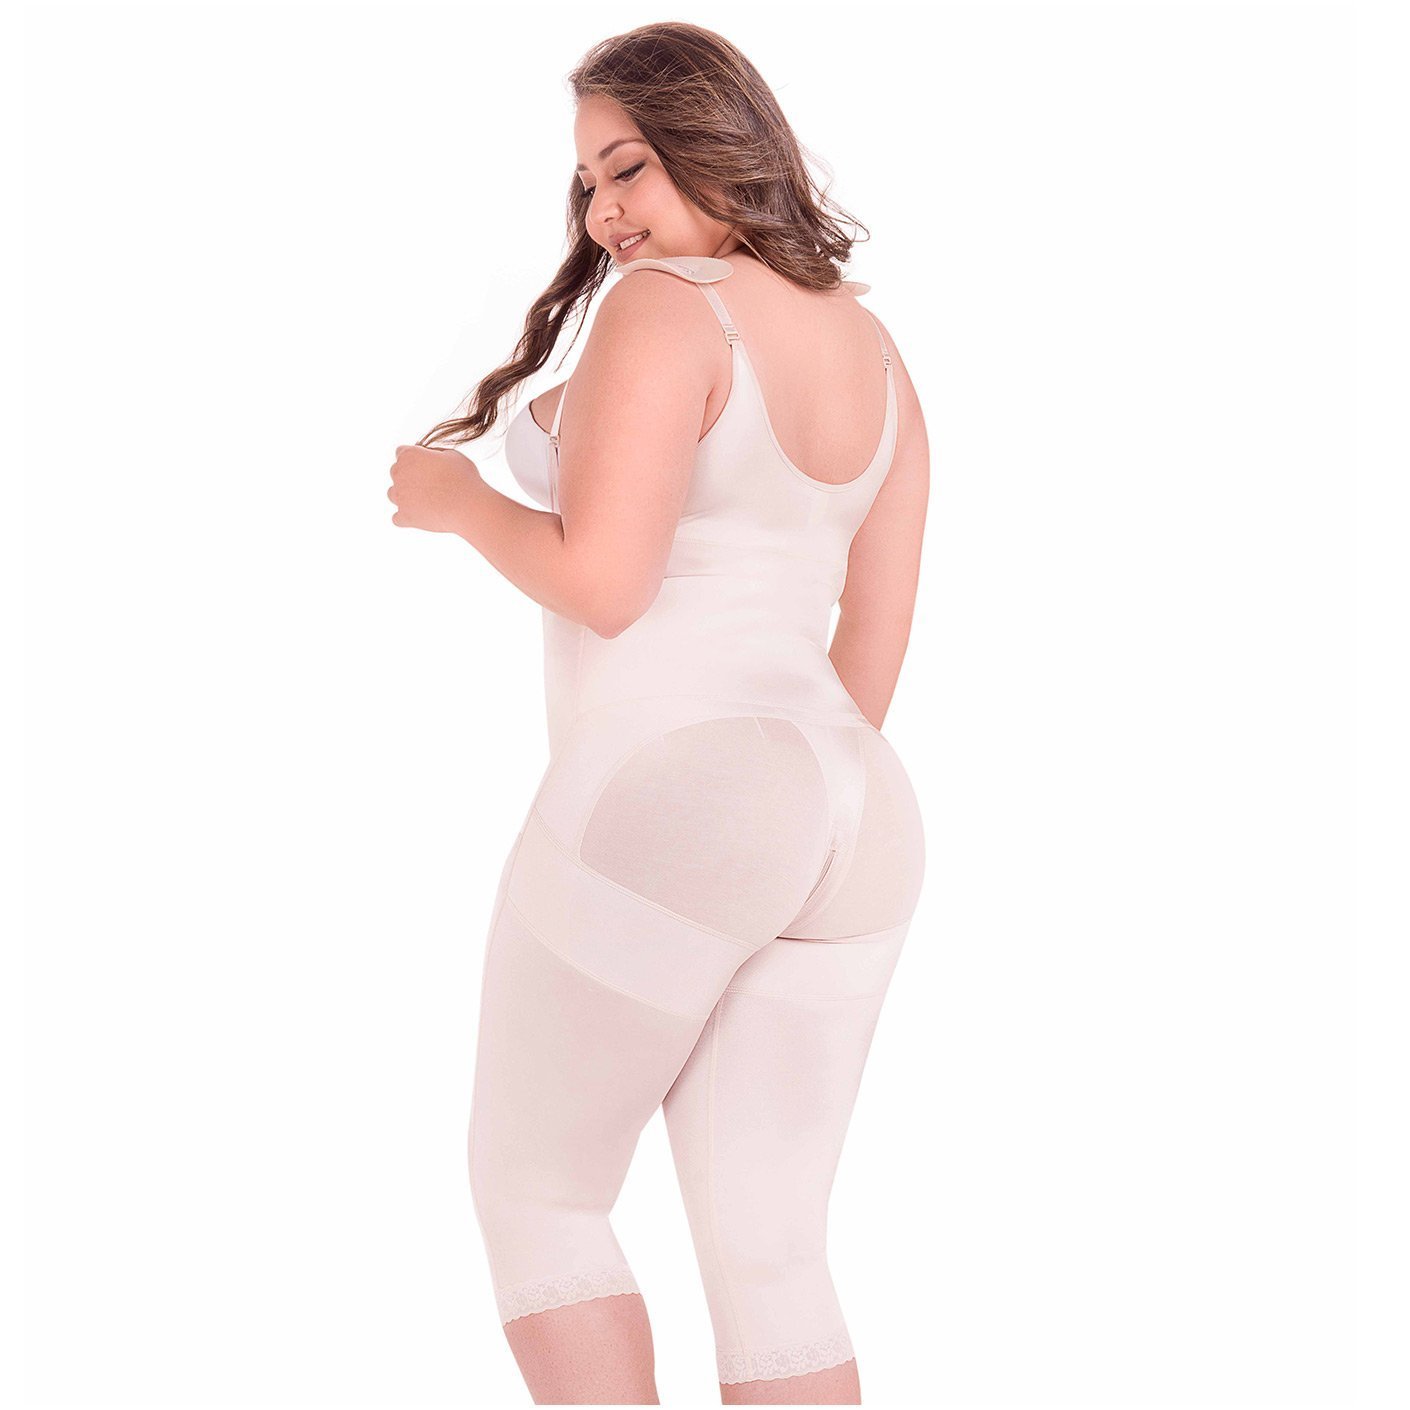 MariaE 9702 Full Body Shaper for Women / Open Bust with Front Closure - New England Supplier